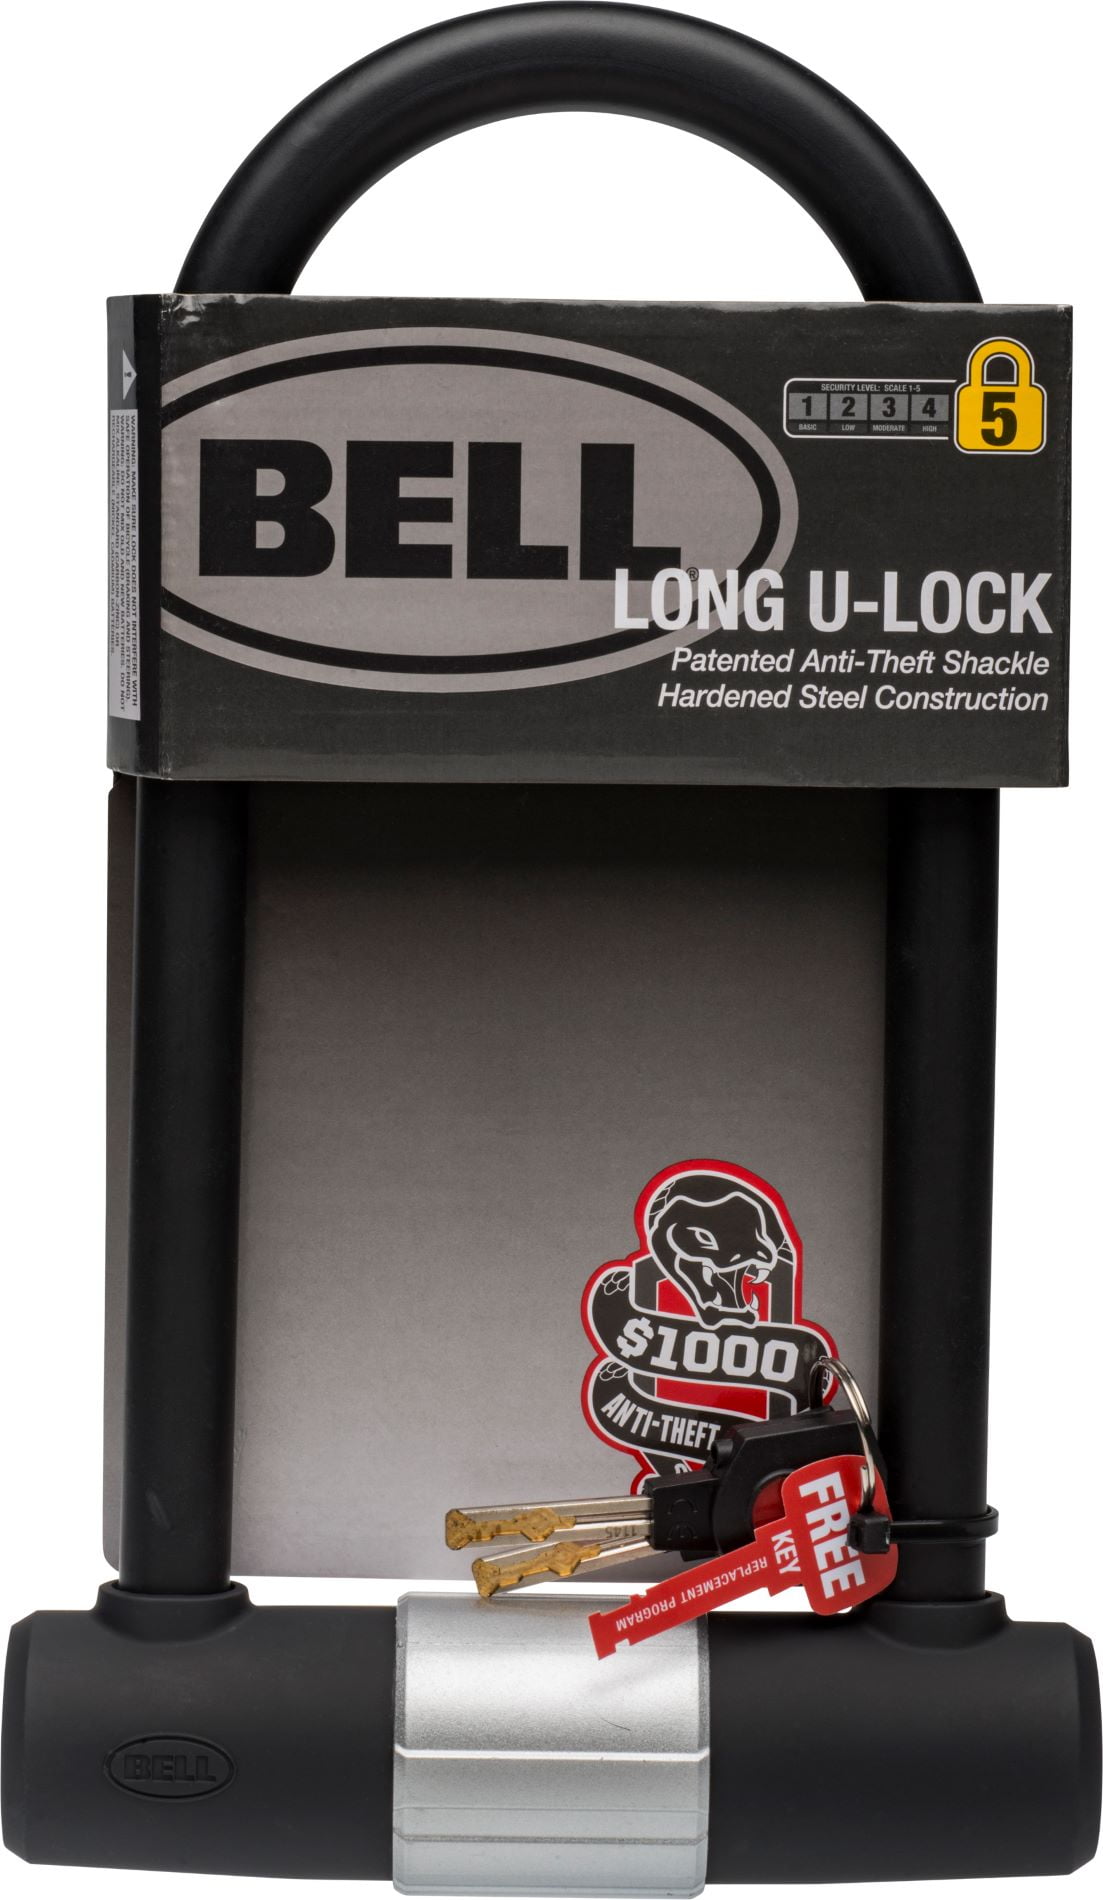 Details about   Bell U-Lock Bike Lock Security Level 4 Anti-Theft Shackle Hardened Steel NEW! 